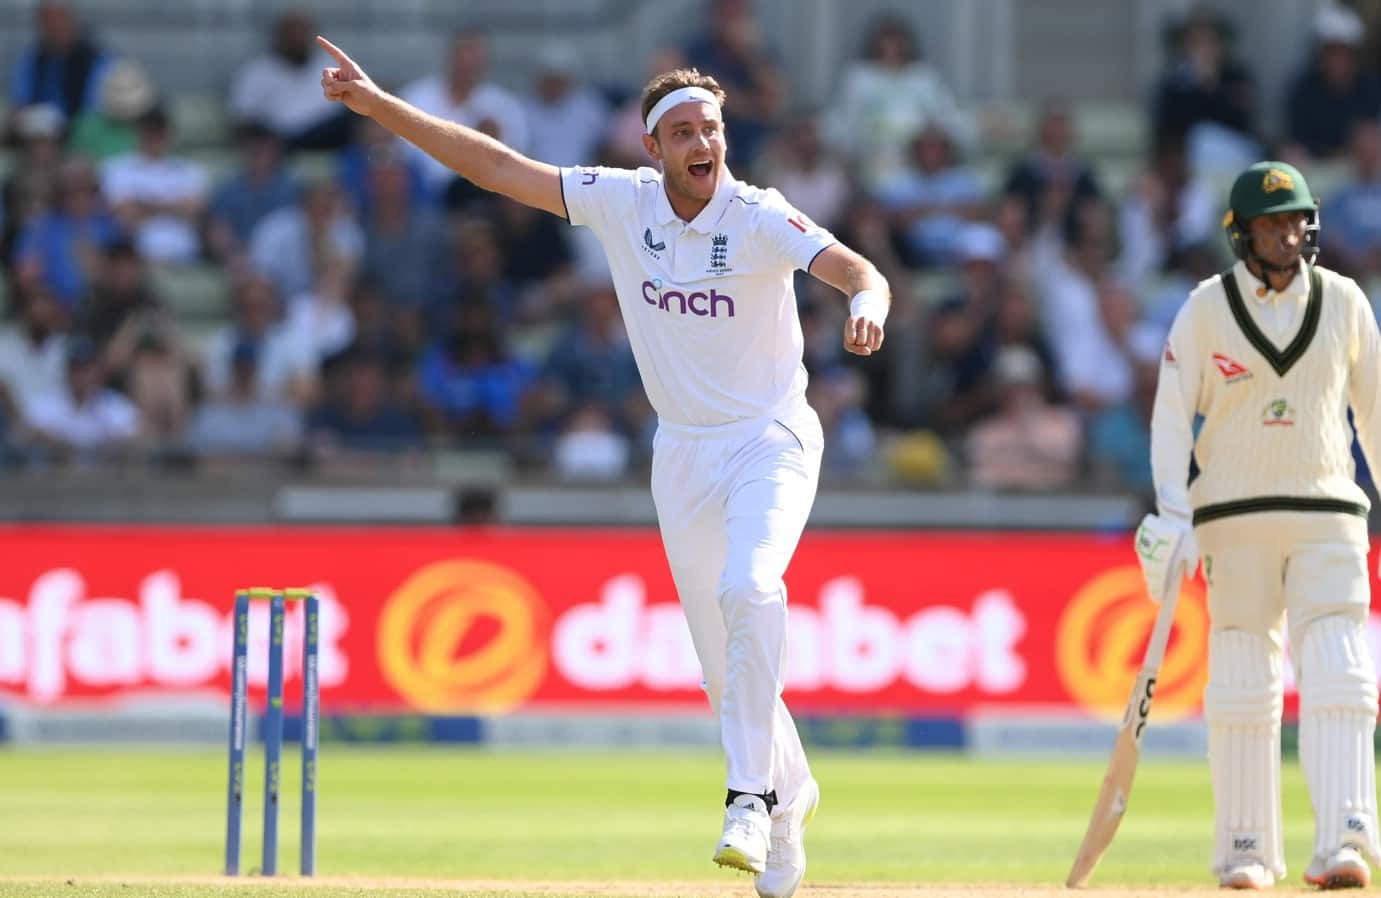 Ashes 2023 | Broad Leads English Fightback As Australia Stumble Late On Topsy-Turvy Day 4
